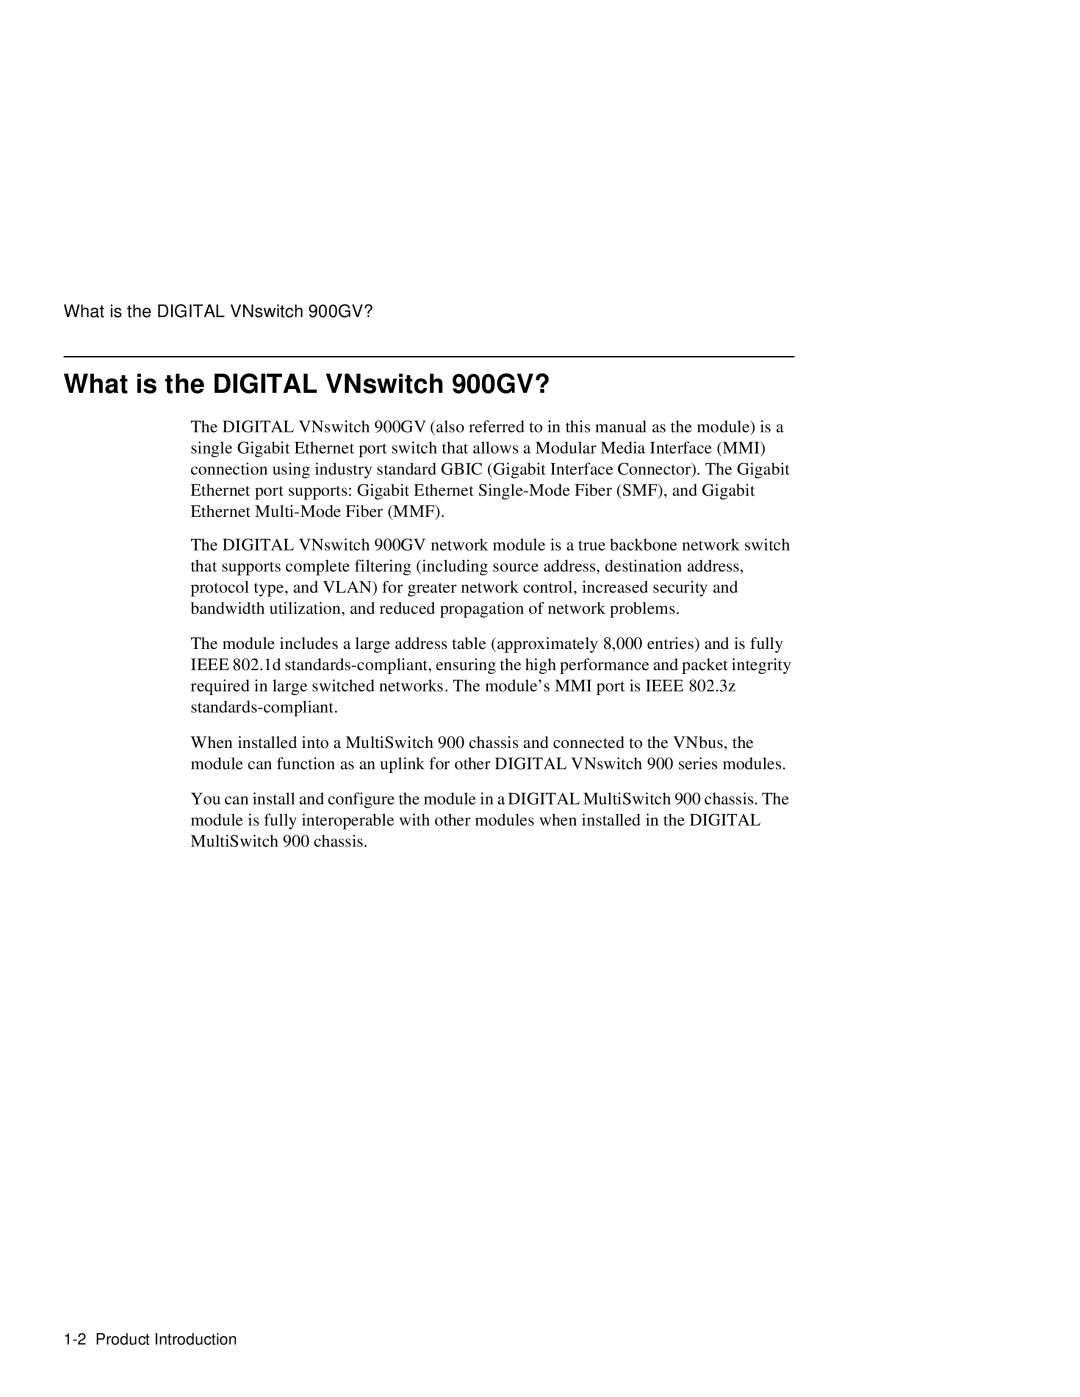 Network Technologies manual What is the Digital VNswitch 900GV? 